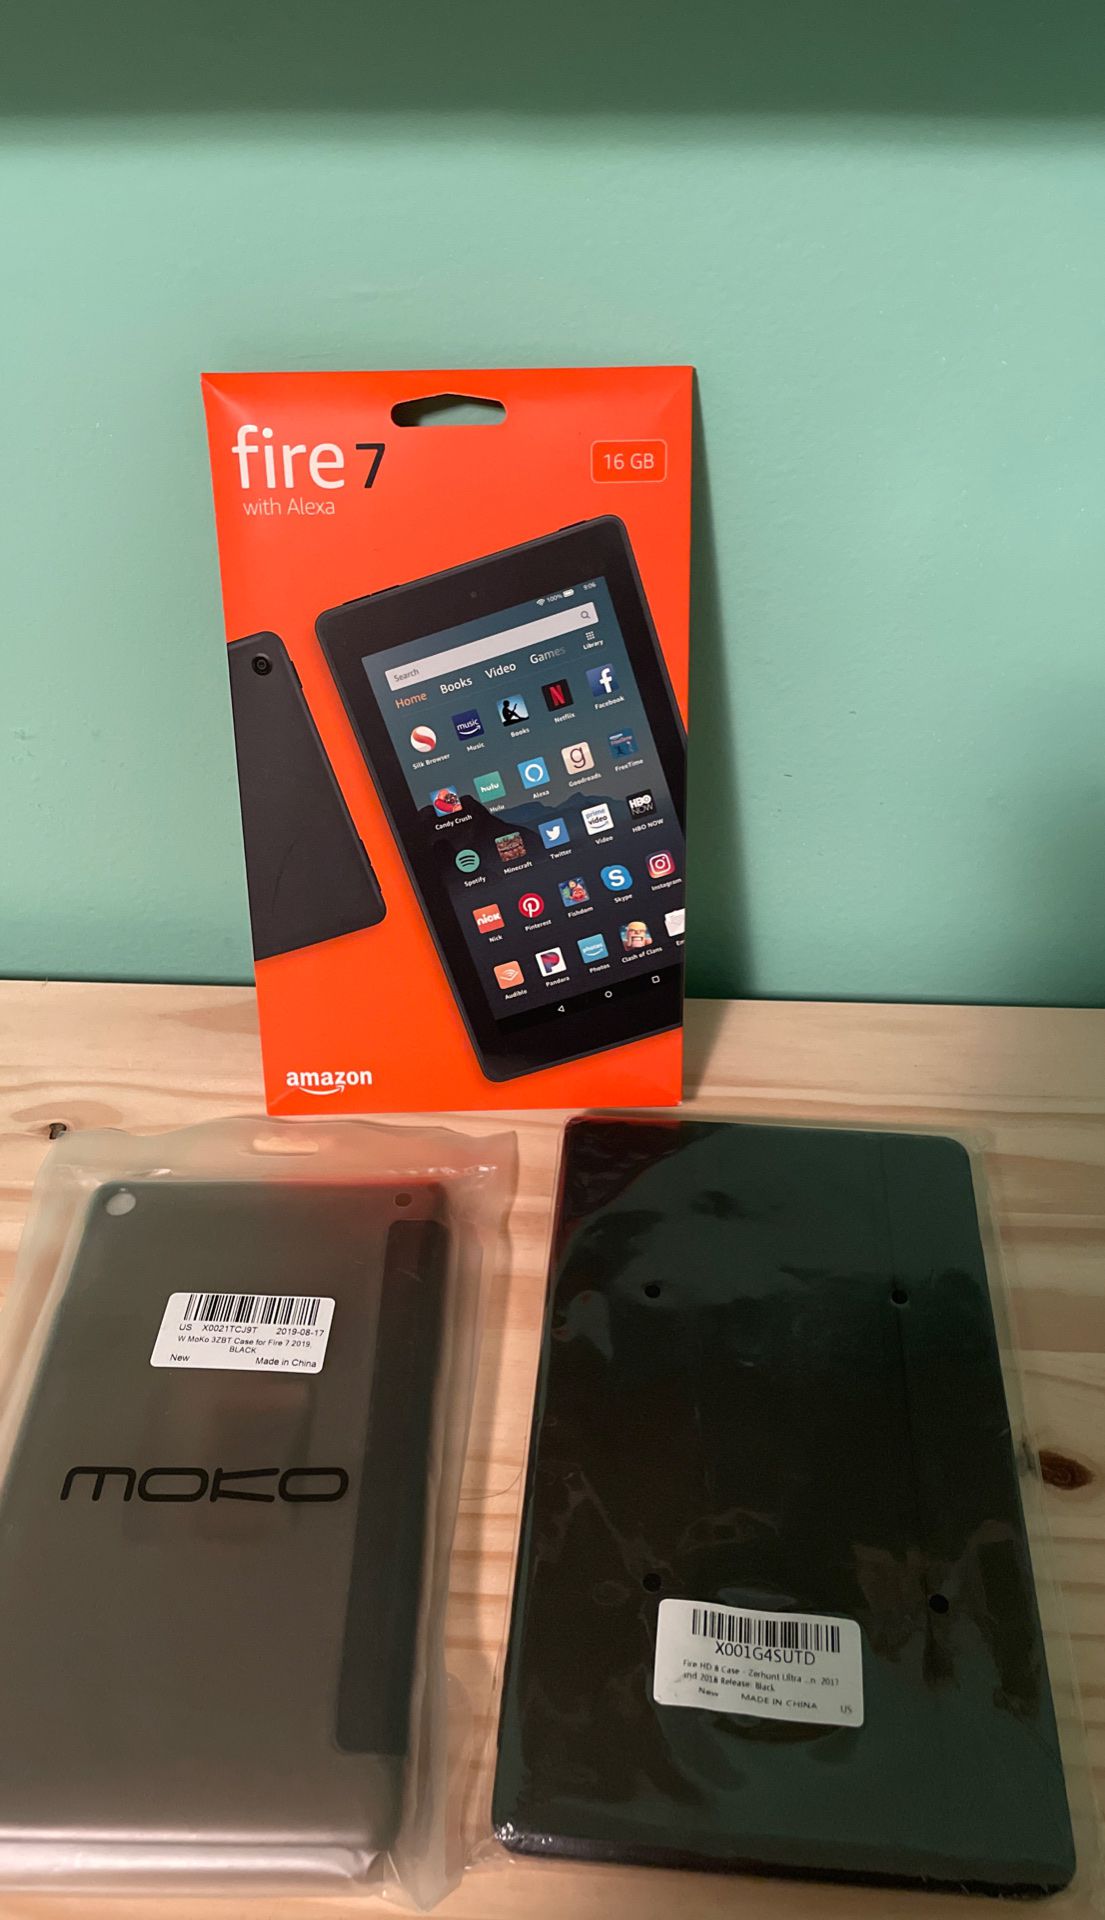 Fire 7 tablet with two cases